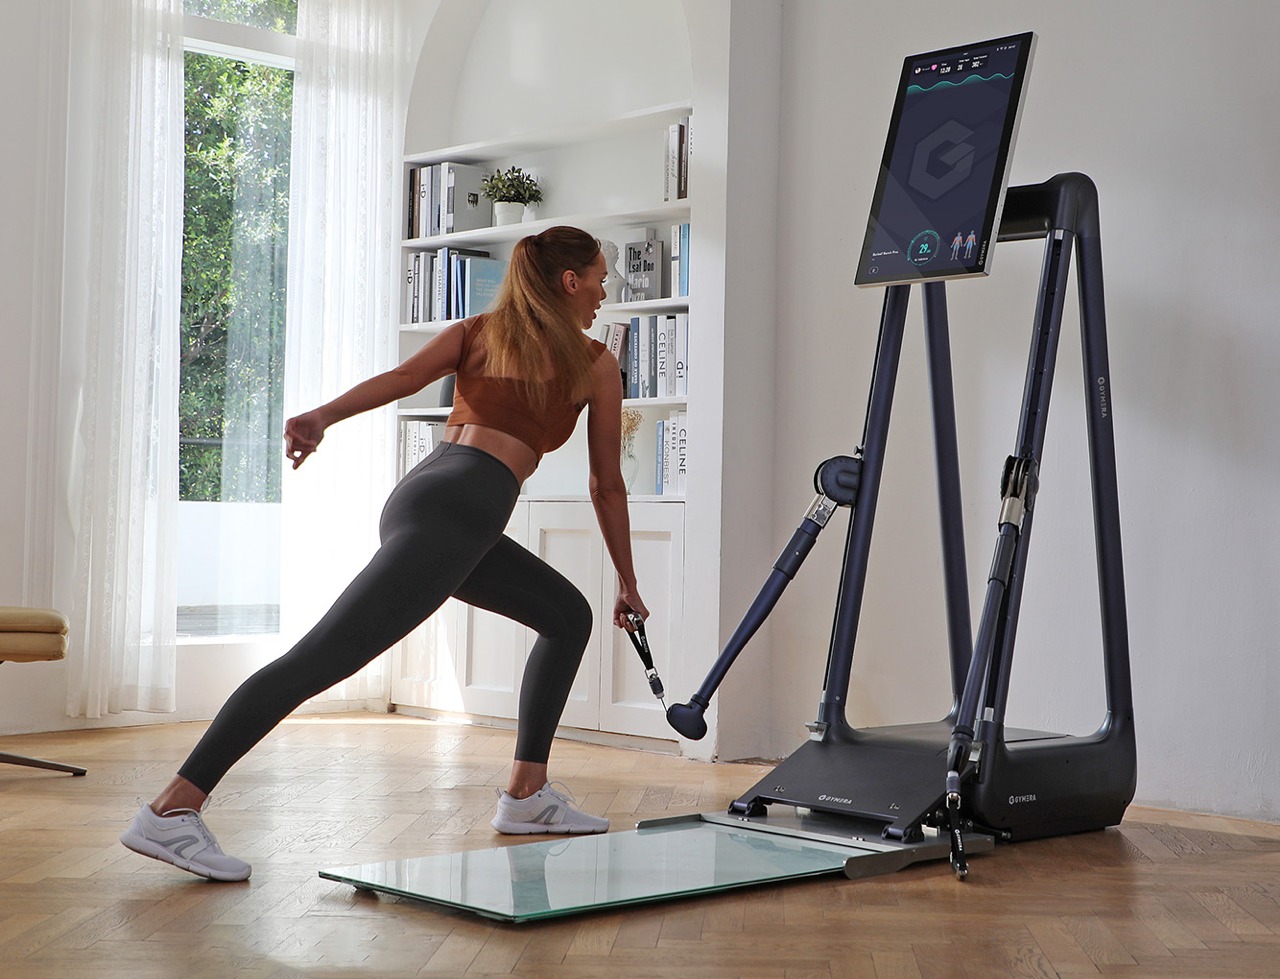 This playful smart home gym brings a smarter and more enjoyable way to get  in shape - Yanko Design